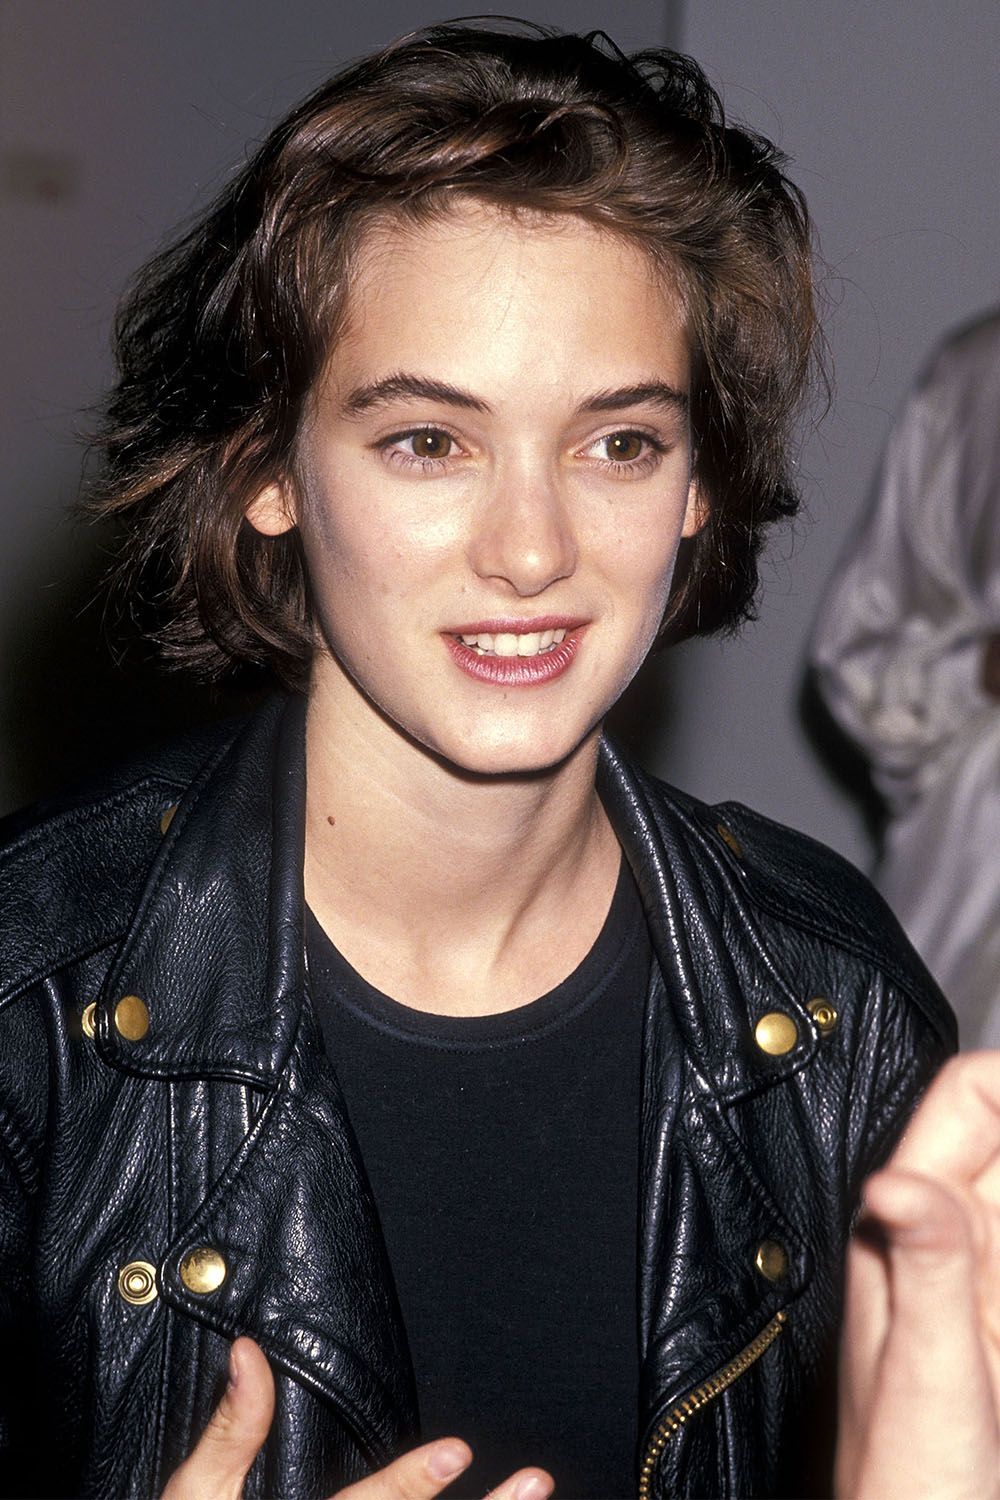 Winona Ryders Beauty Evolution From the 80s to Now